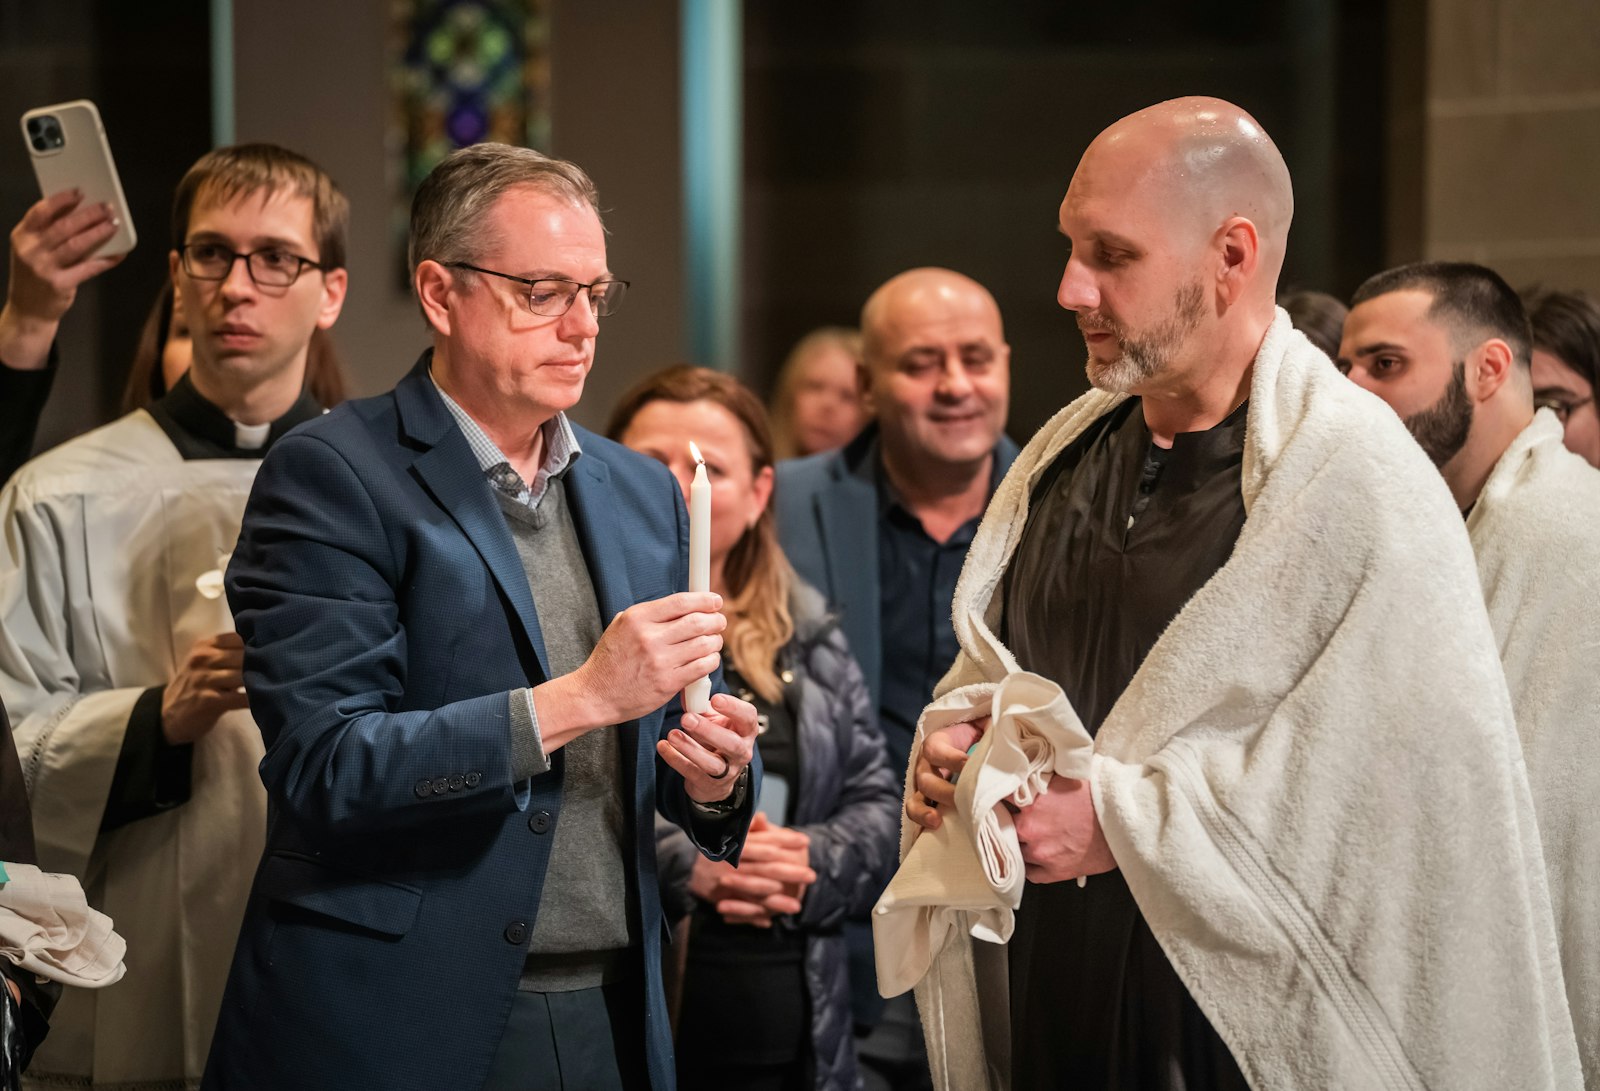 Brian Mull receives the "light of Christ" from his sponsor and co-worker, Jerry McElhone, left, after his baptism. Mull said it was special to enter the Catholic faith alongside his co-workers, receiving baptism, confirmation and first Communion from his boss, Archbishop Vigneron.